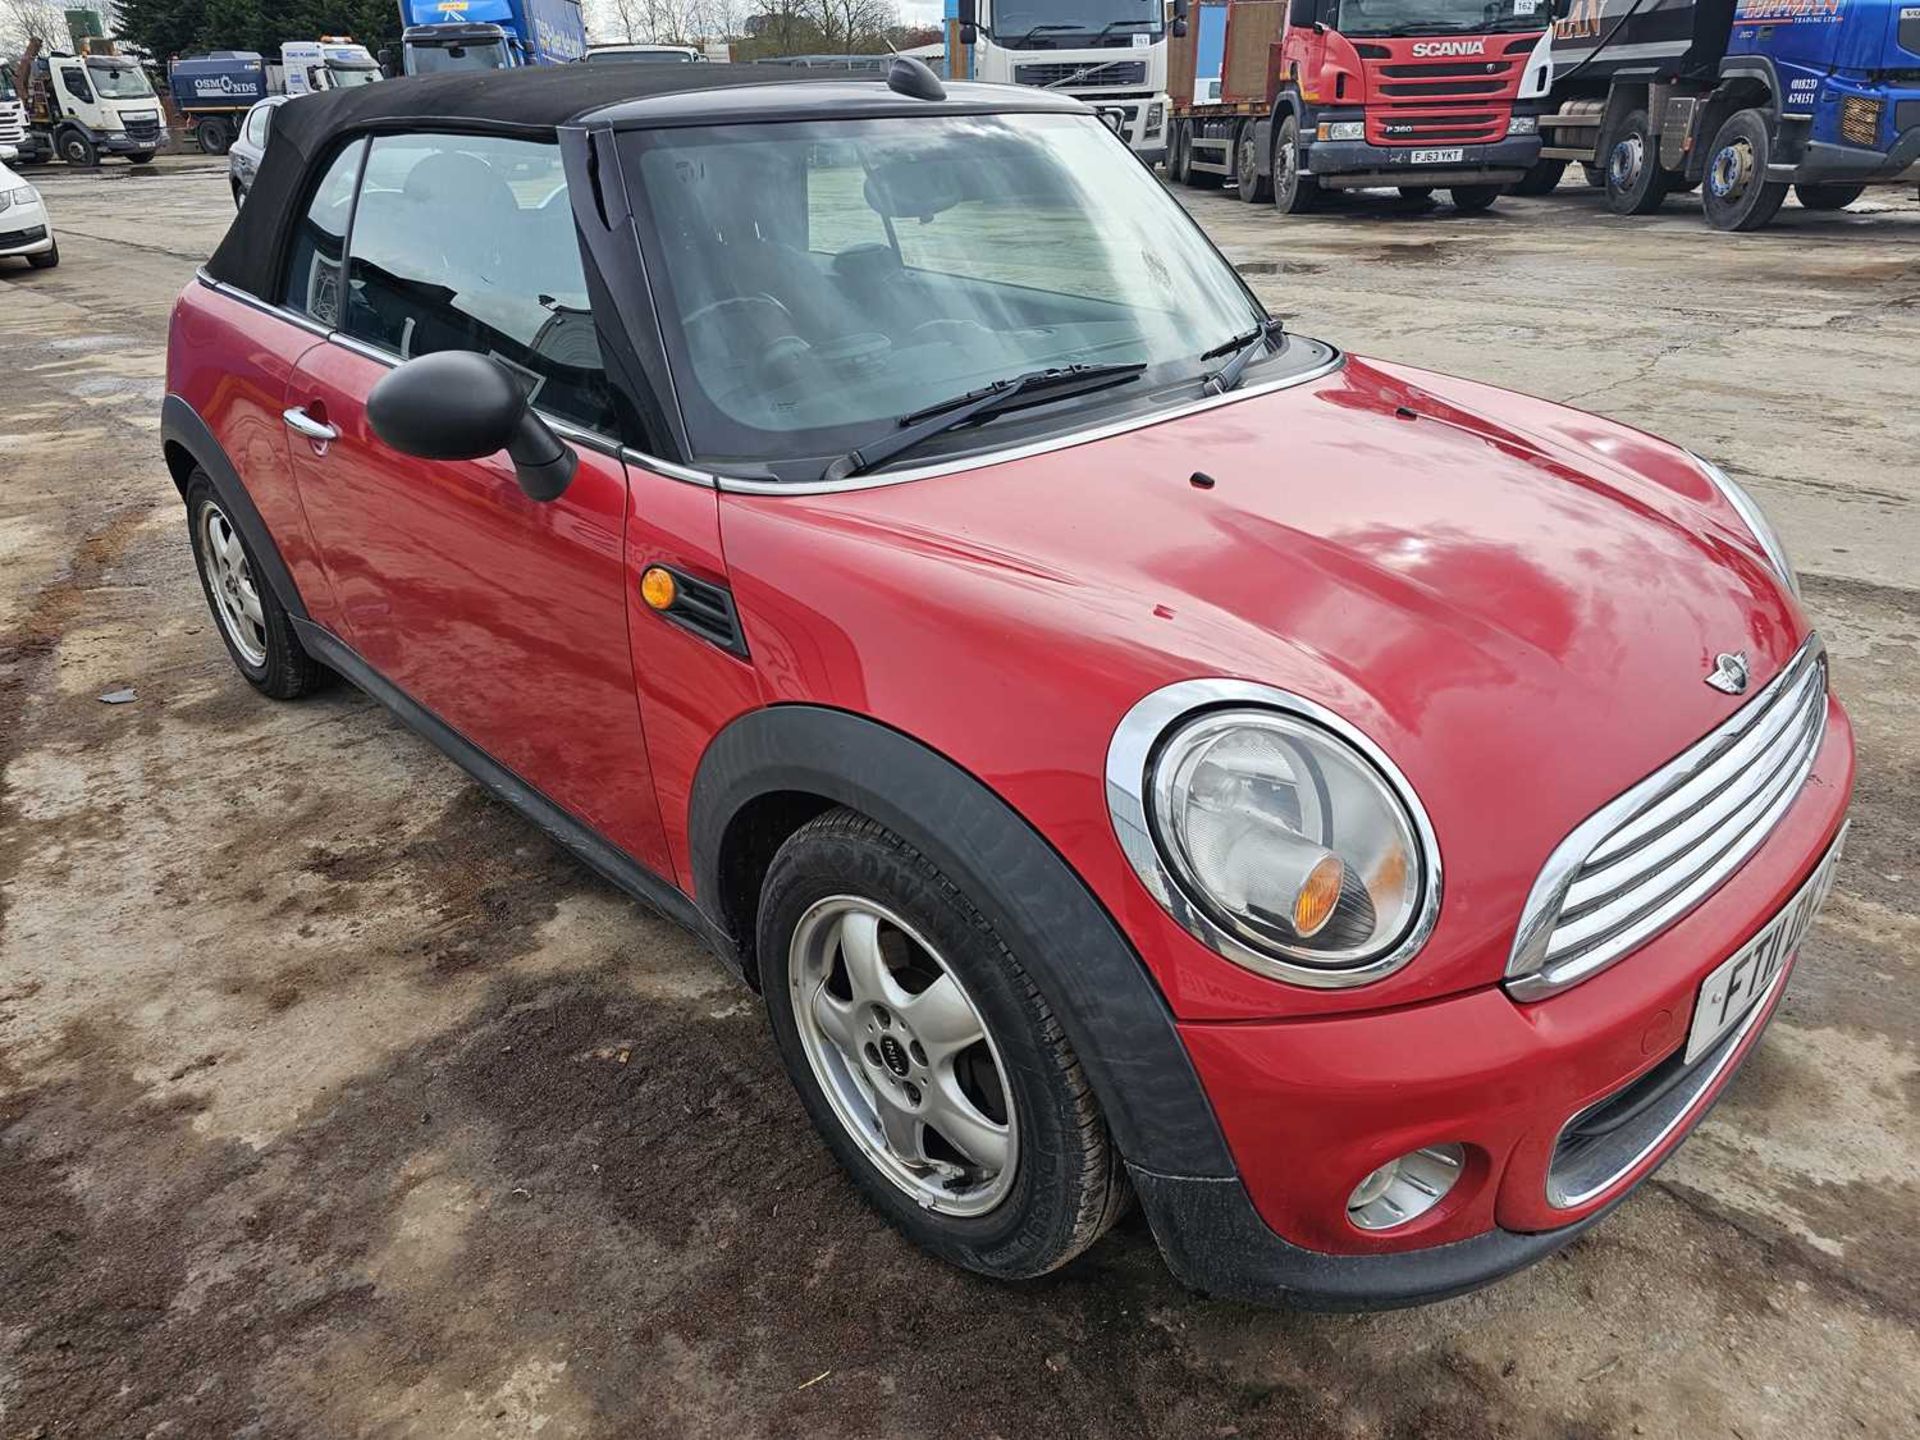 2011 Mini One Convertible, 6 Speed, Bluetooth, Cruise Control, A/C (Reg. Docs. Available) - Image 5 of 25